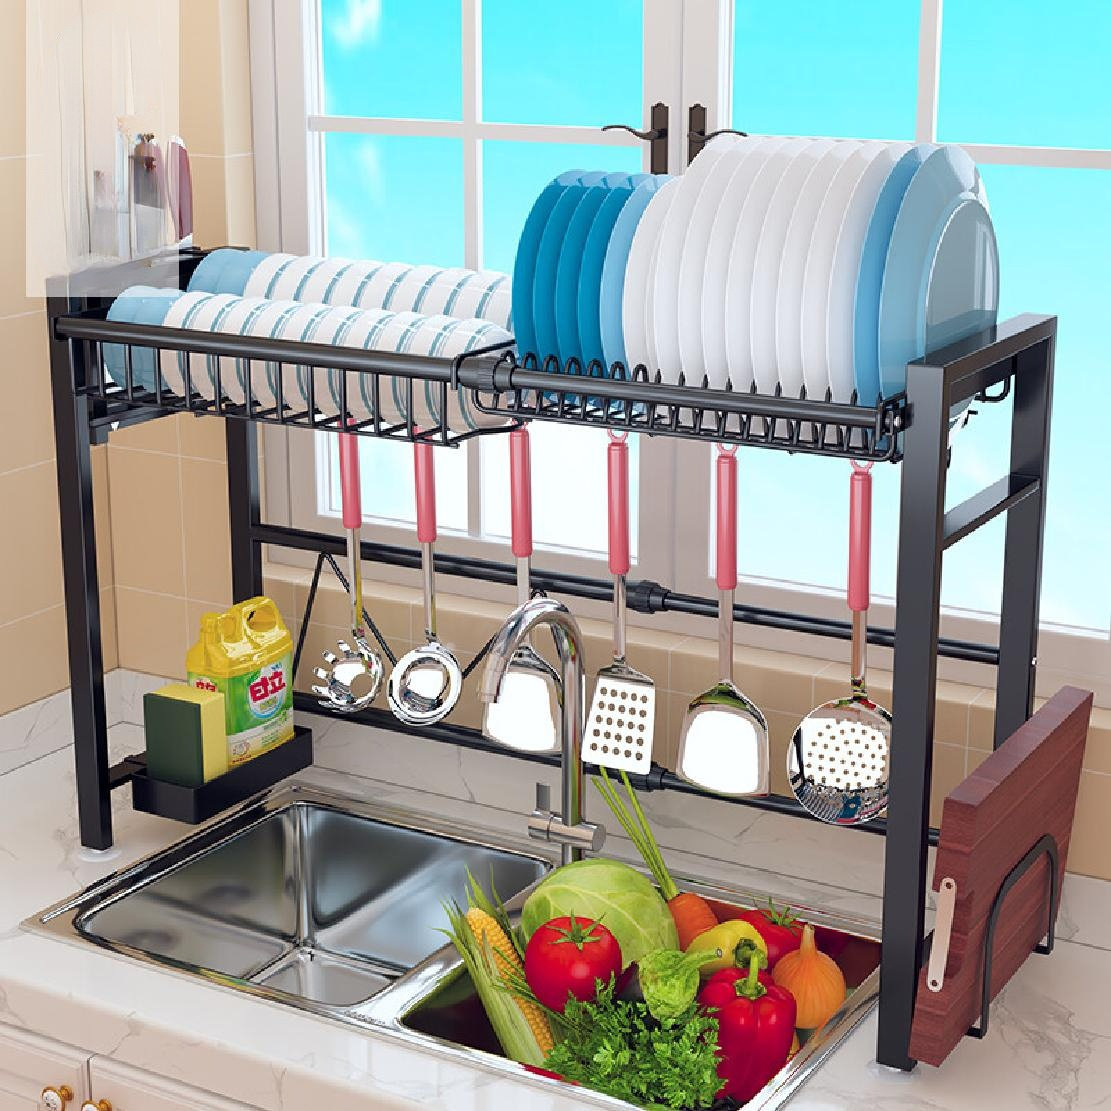 Captive Gala Stainless Steal Dish Rack